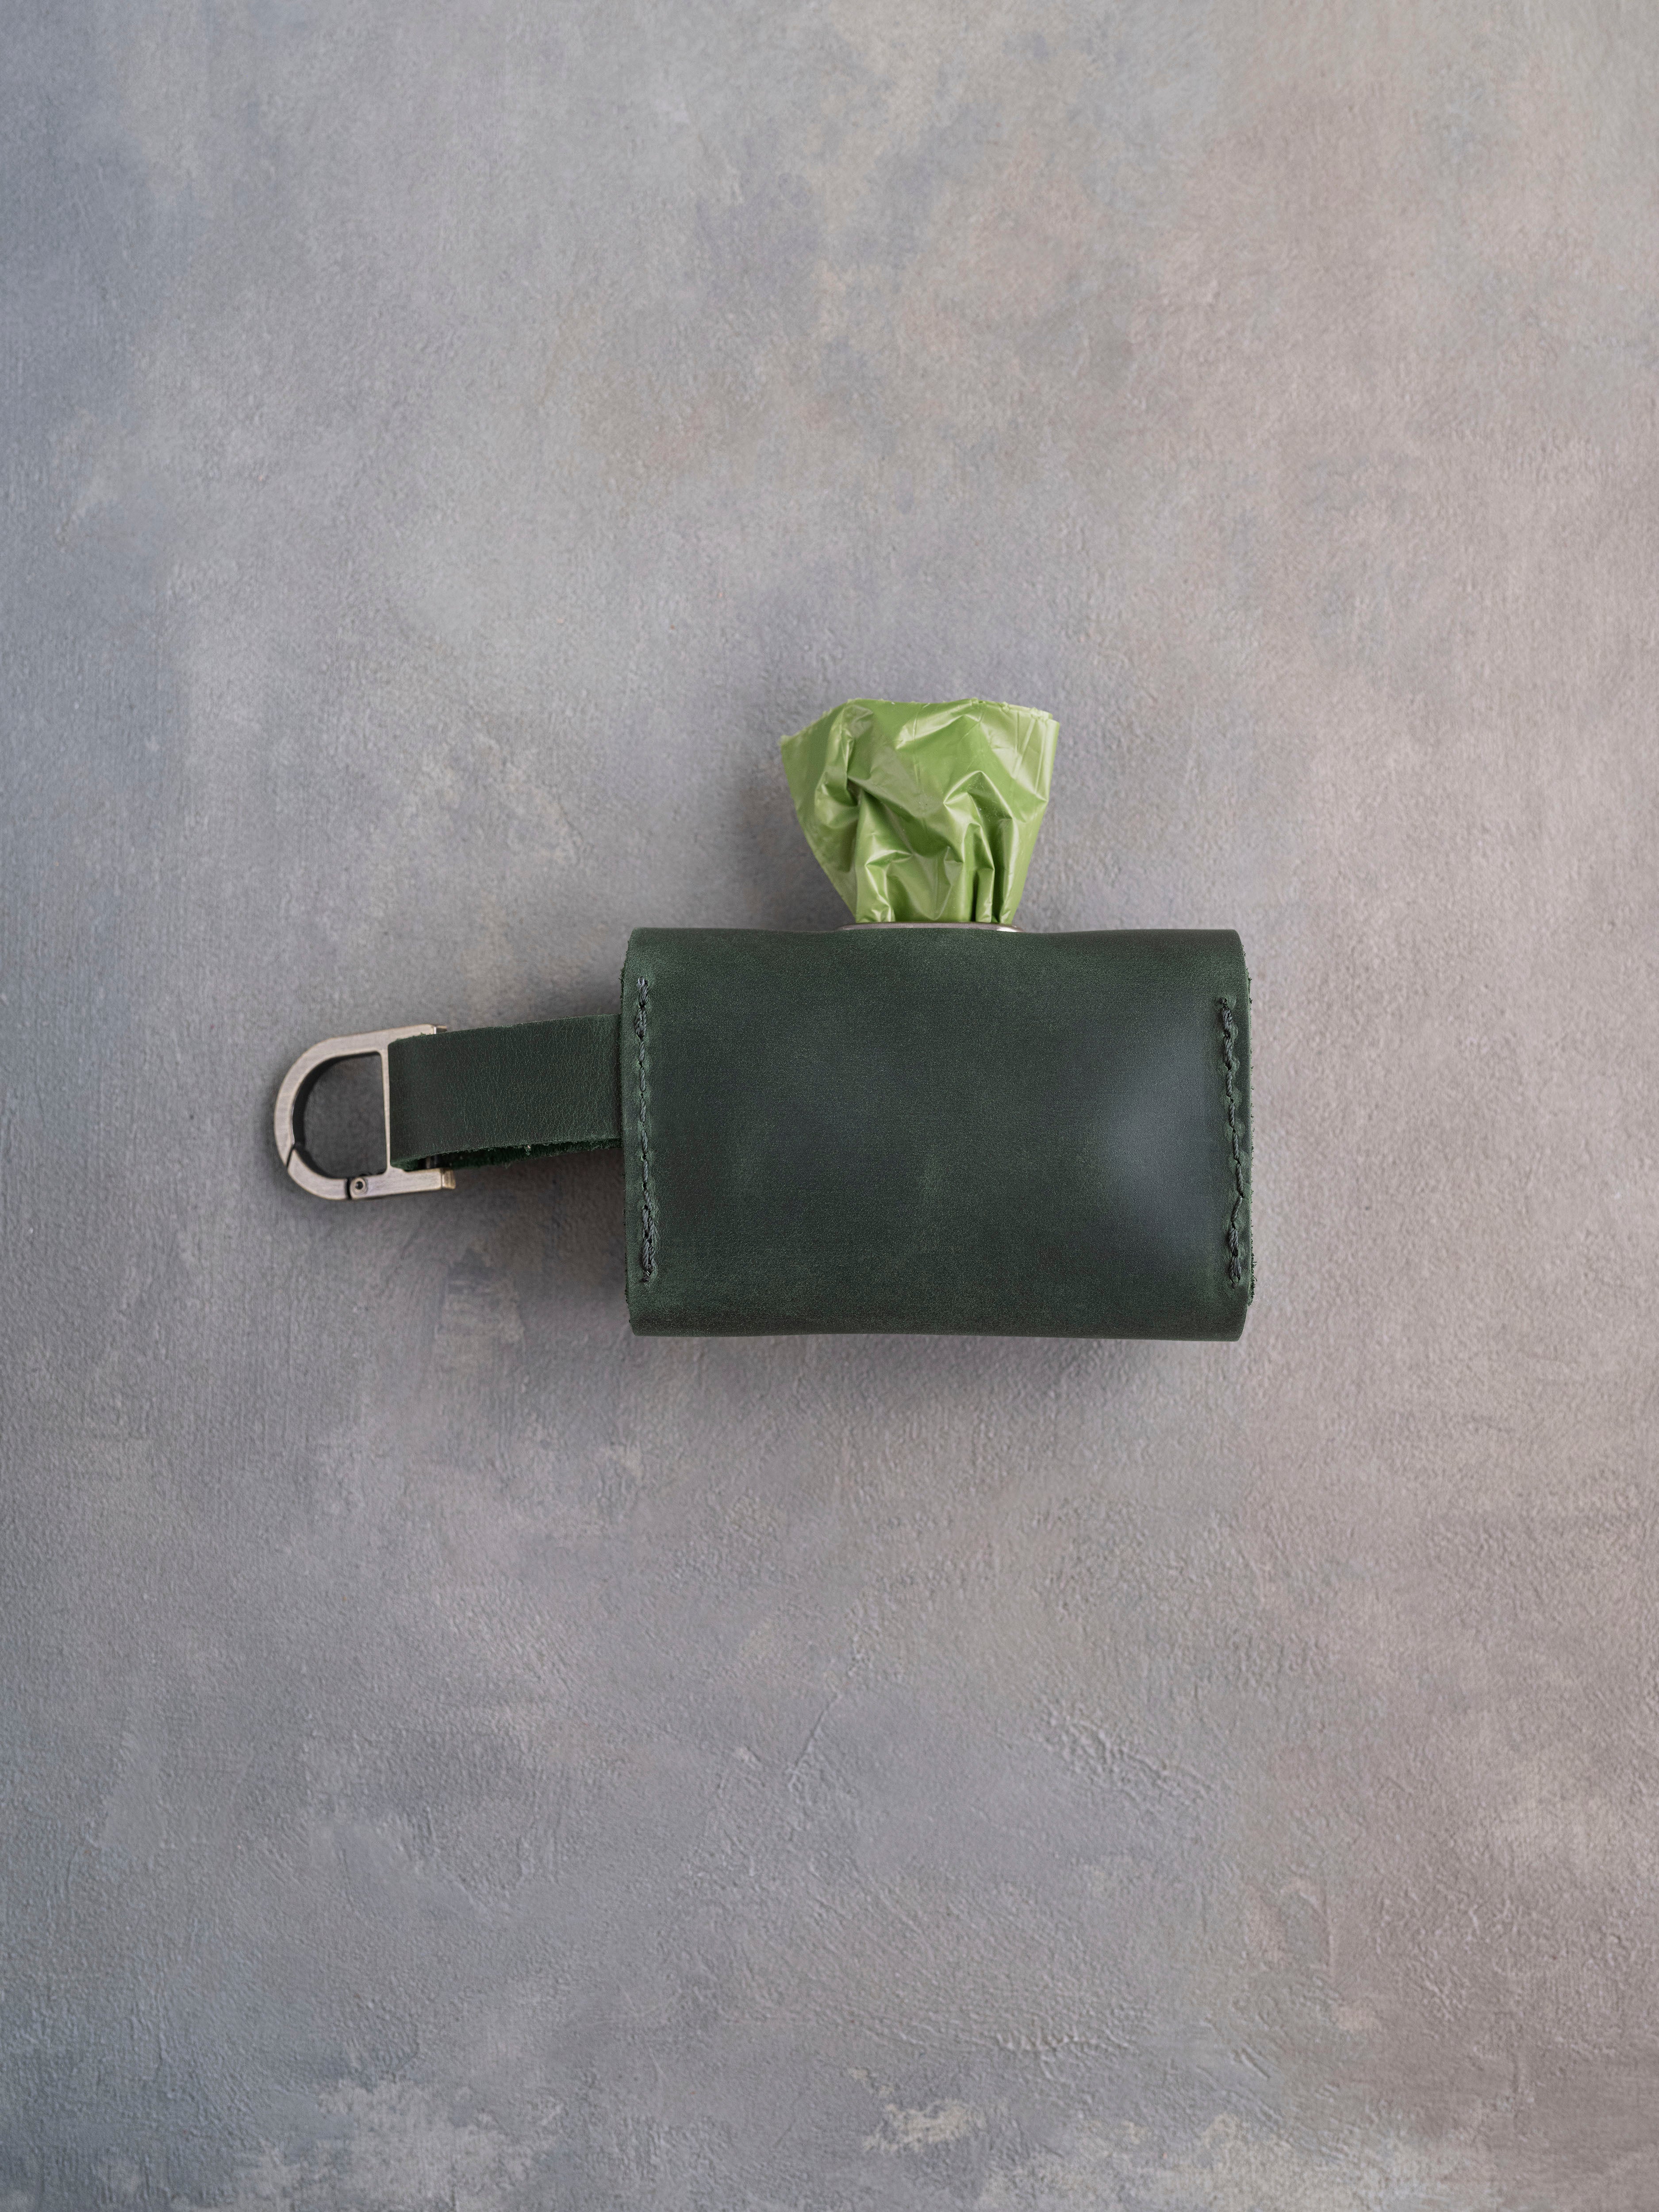 Leather Dog Poop Bag Holder with button closure